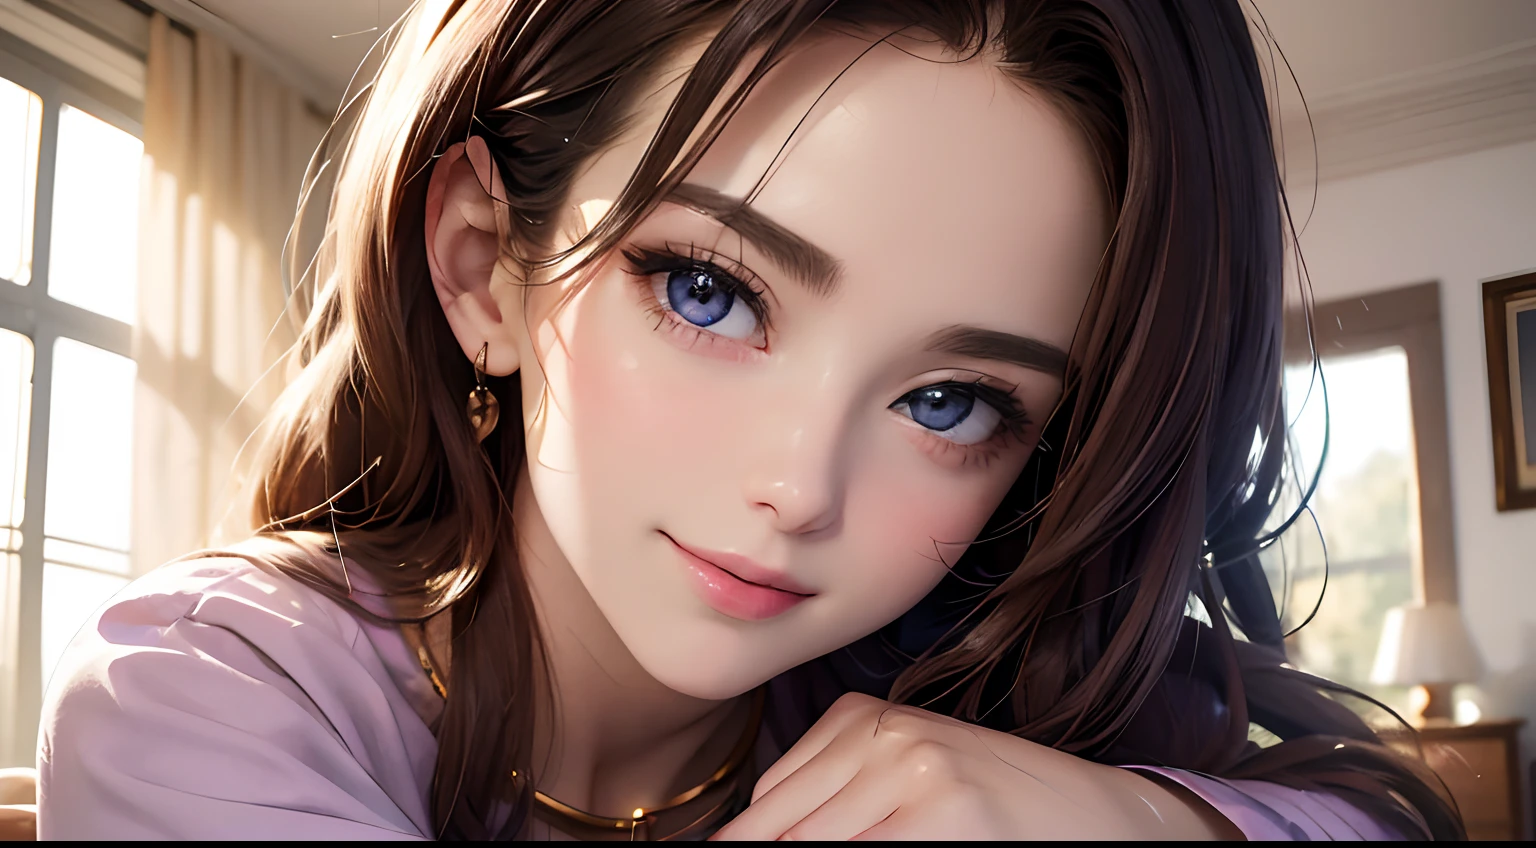 (Higher resolution, Distinct_image) beste-Qualit, The woman, Masterpiece, Highly detailed, semi-realistic, 21 old years, Beautiful, Young, a handsome, tshirt, lilac shirt stretched, collar around the neck, interior, Modern Room, Window, Wake up, morning, blusher, Smiling